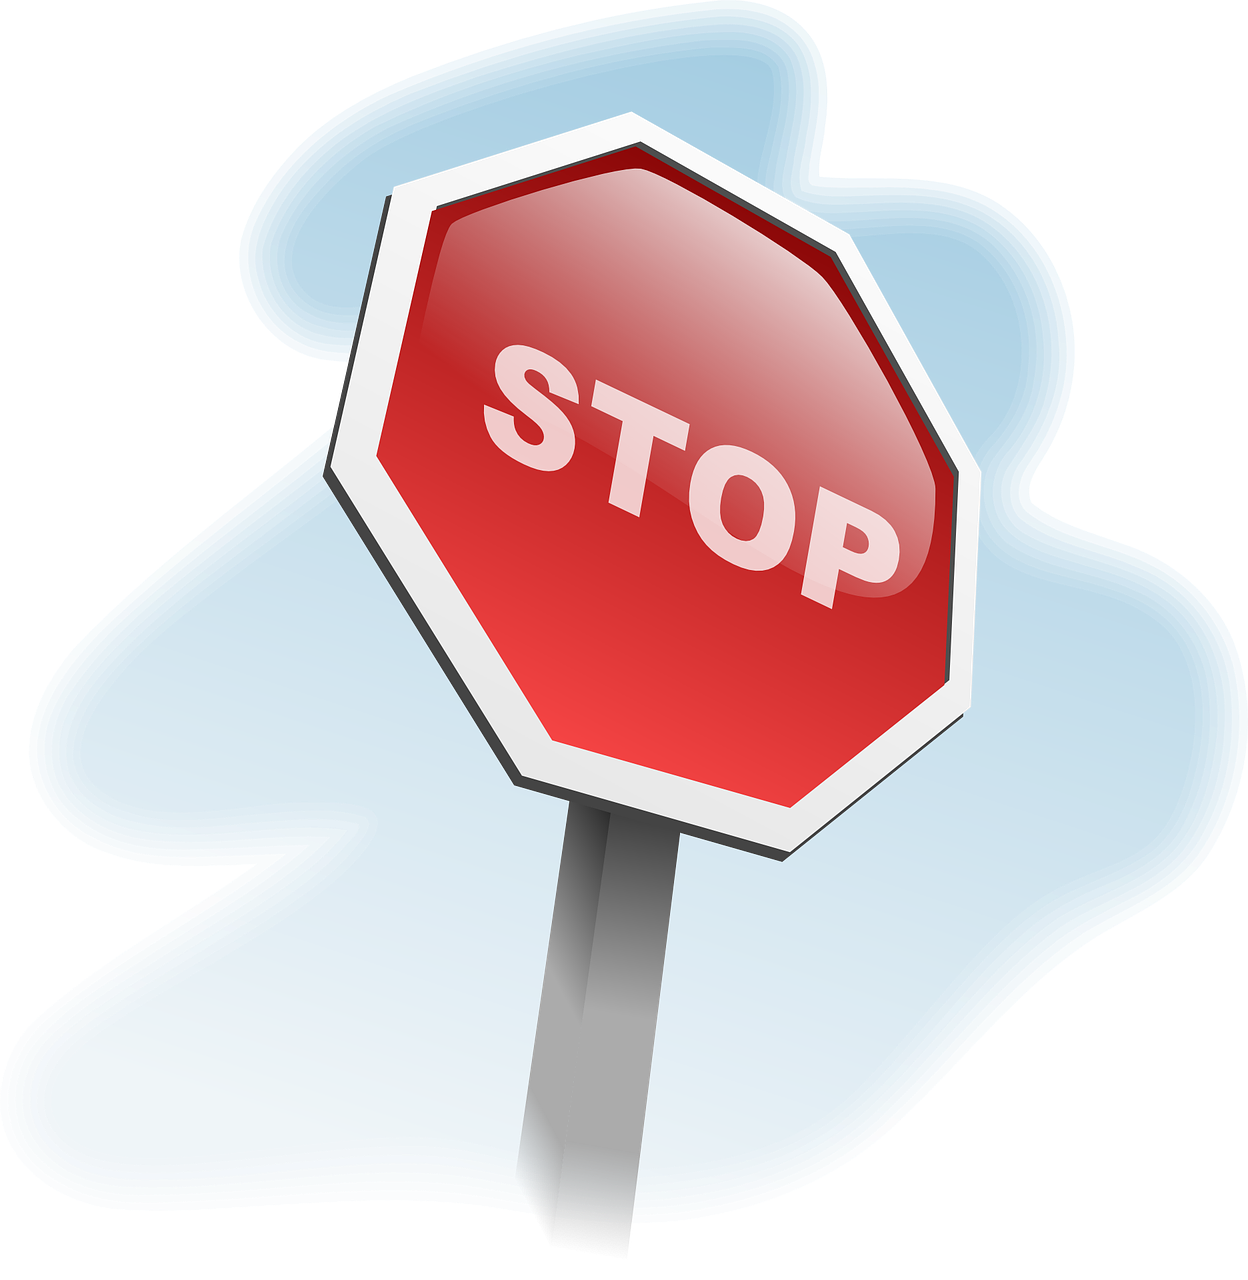 stop sign 37020 1280